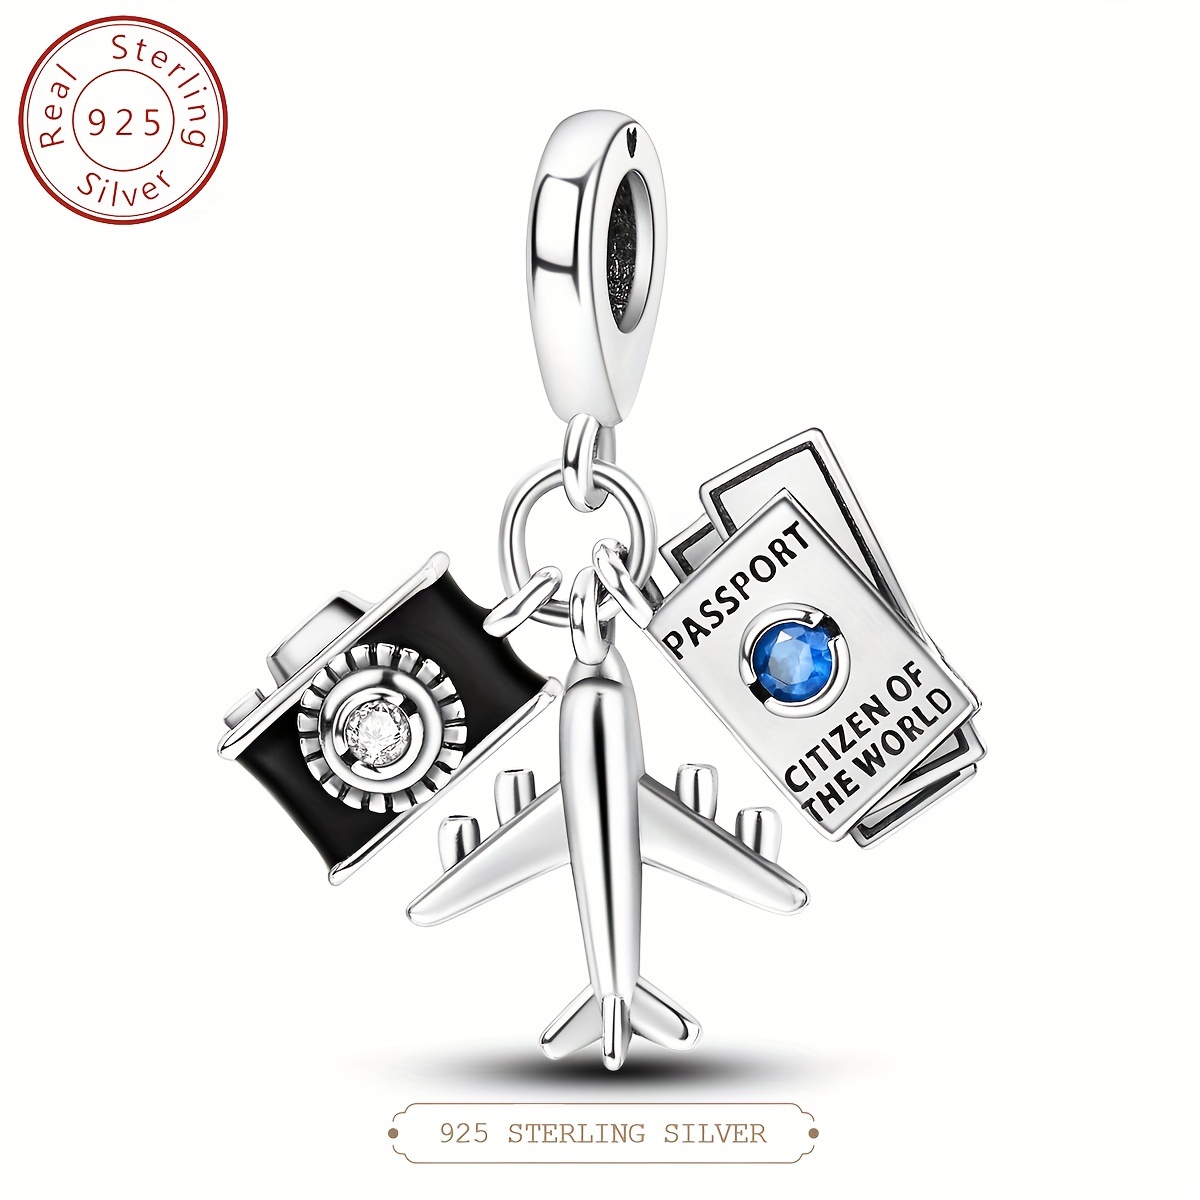 

Travel Collection S925 925 Sterling Silver Camera Plane Passport Dangle Charm Beads Fit For Original Bracelet Bangle Diy Fine Jewelry Making Gift